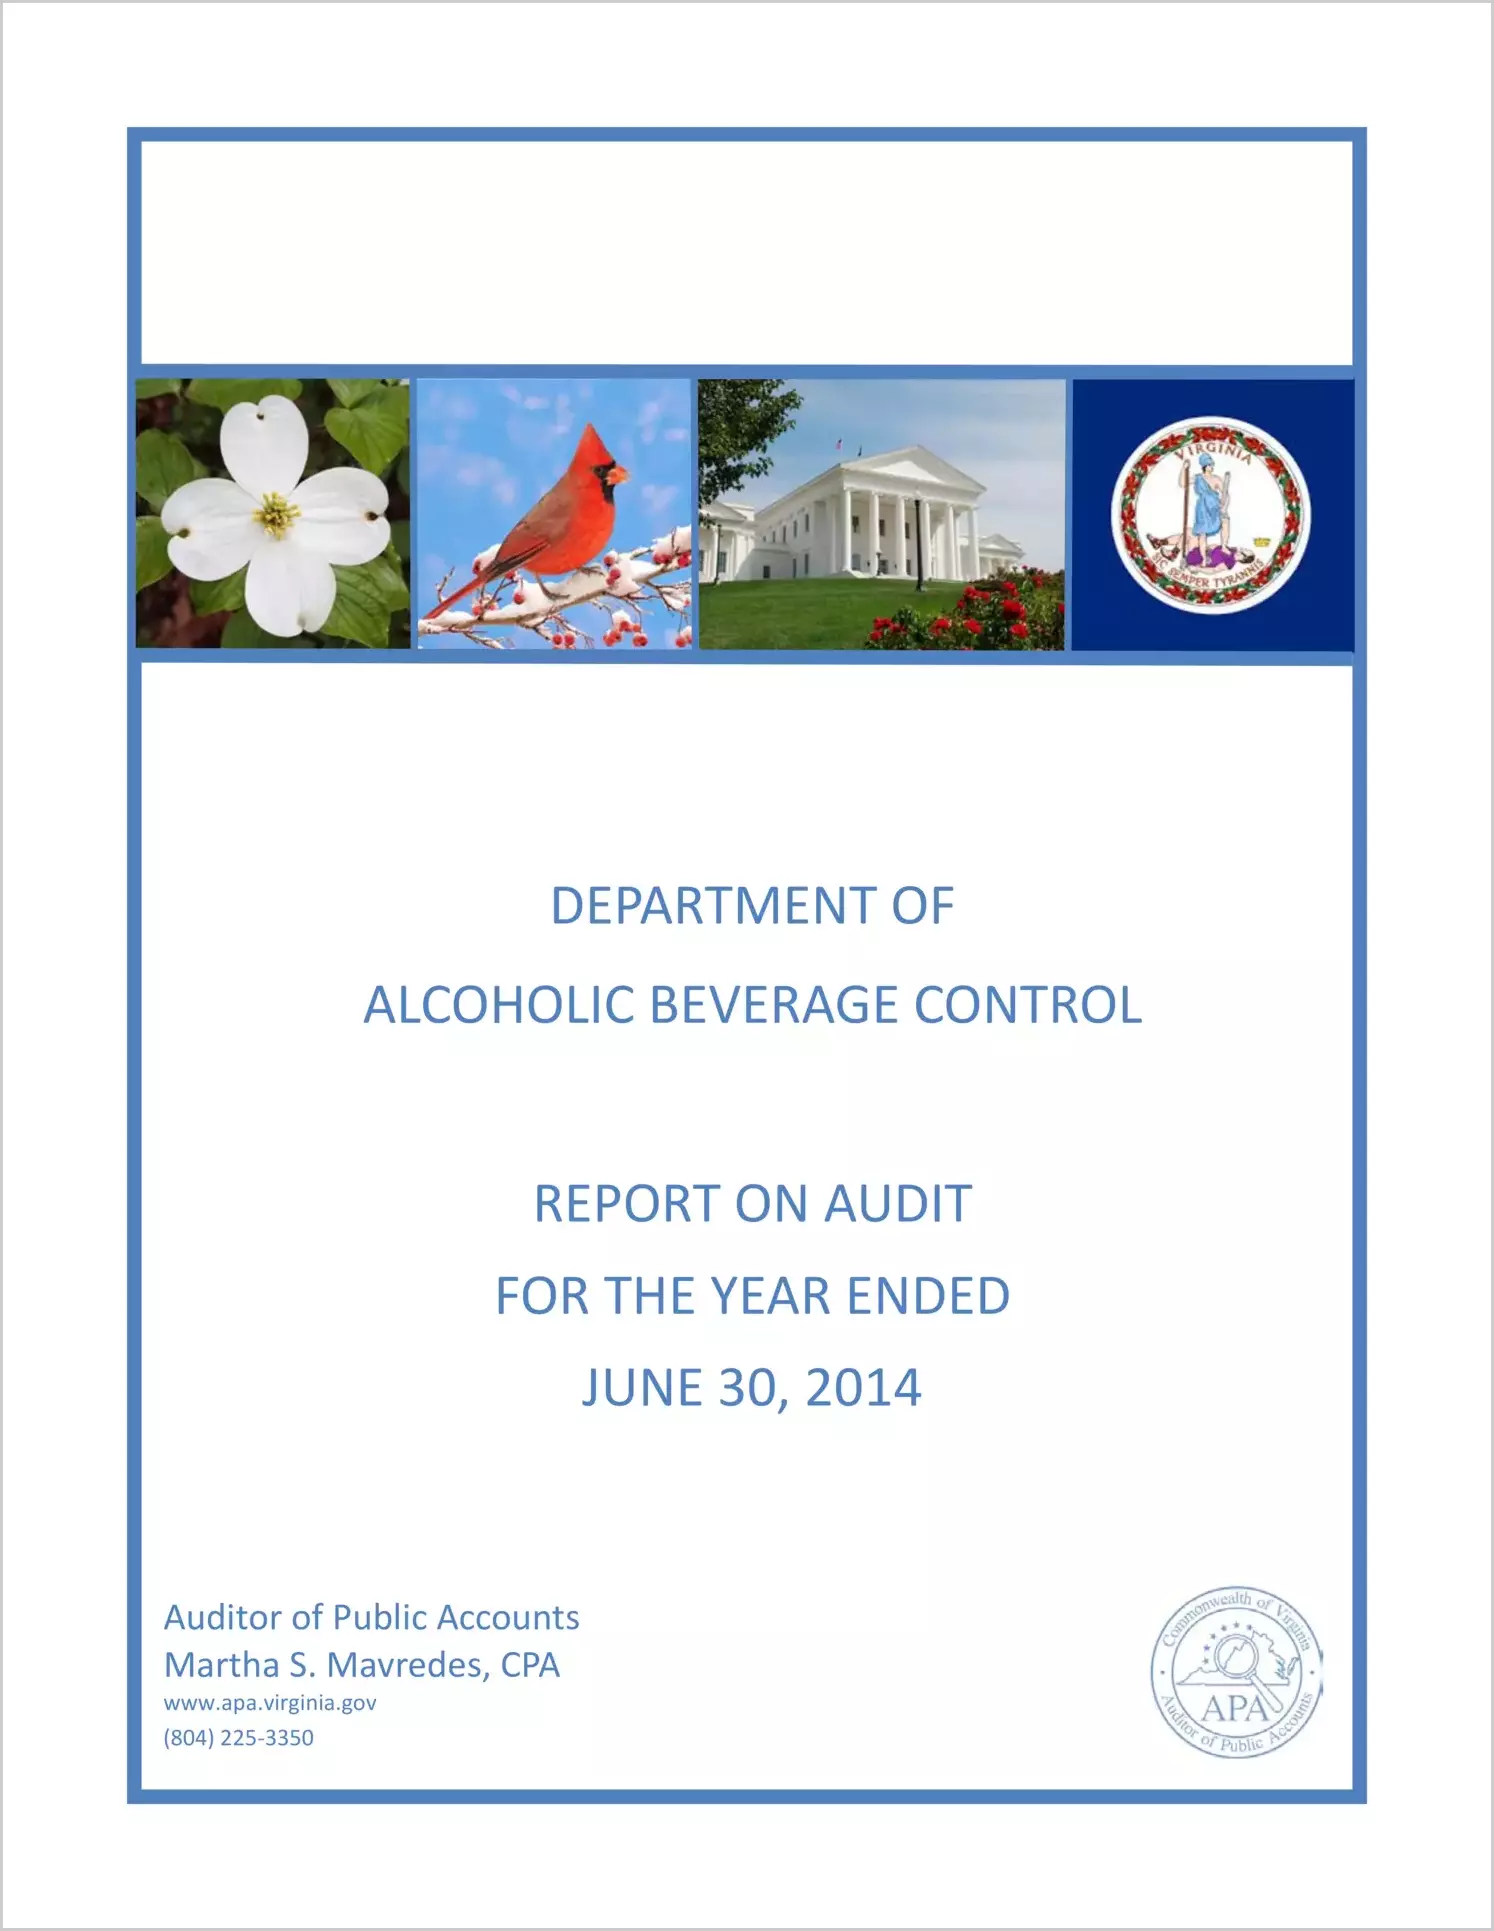 Department of Alcoholic Beverage Control for the year ended June 30, 2014